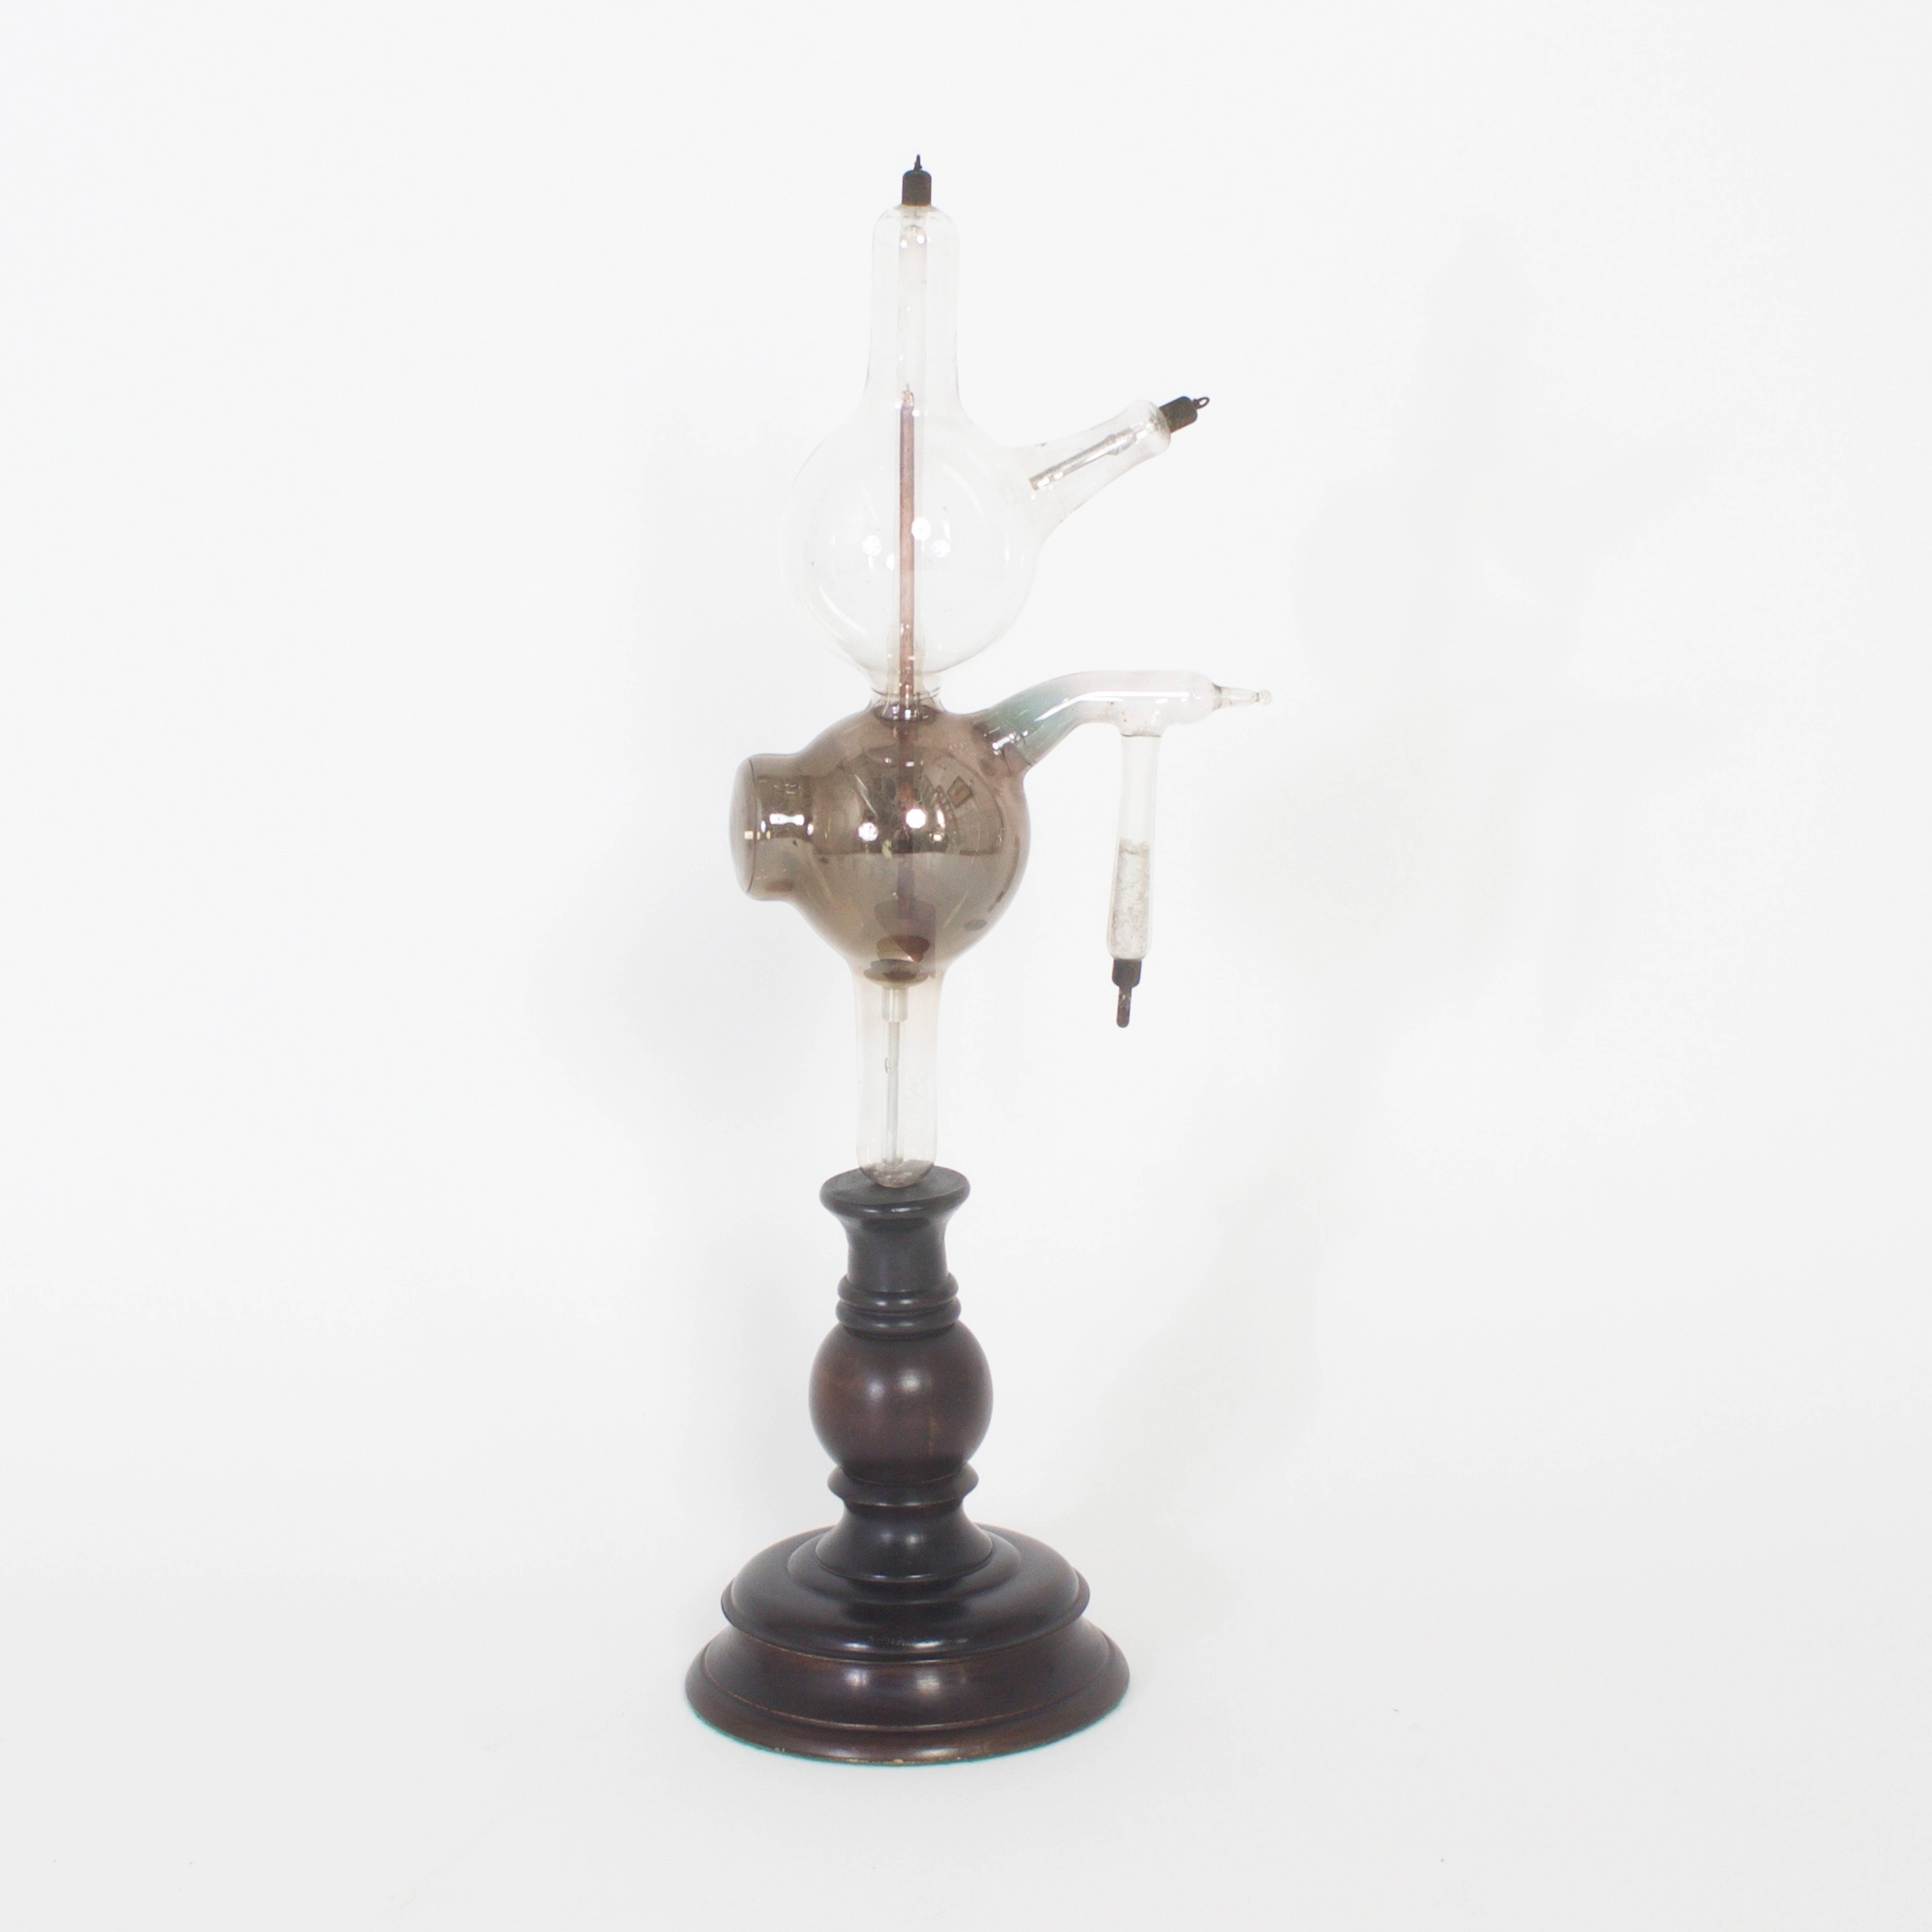 Set of 4 hand blown glass scientific instruments with intriguing sculptural forms. All mounted on Victorian style turned wood bases. Dr. Frankenstein would be proud. (Tall Instrument H: 22 DM: 6)